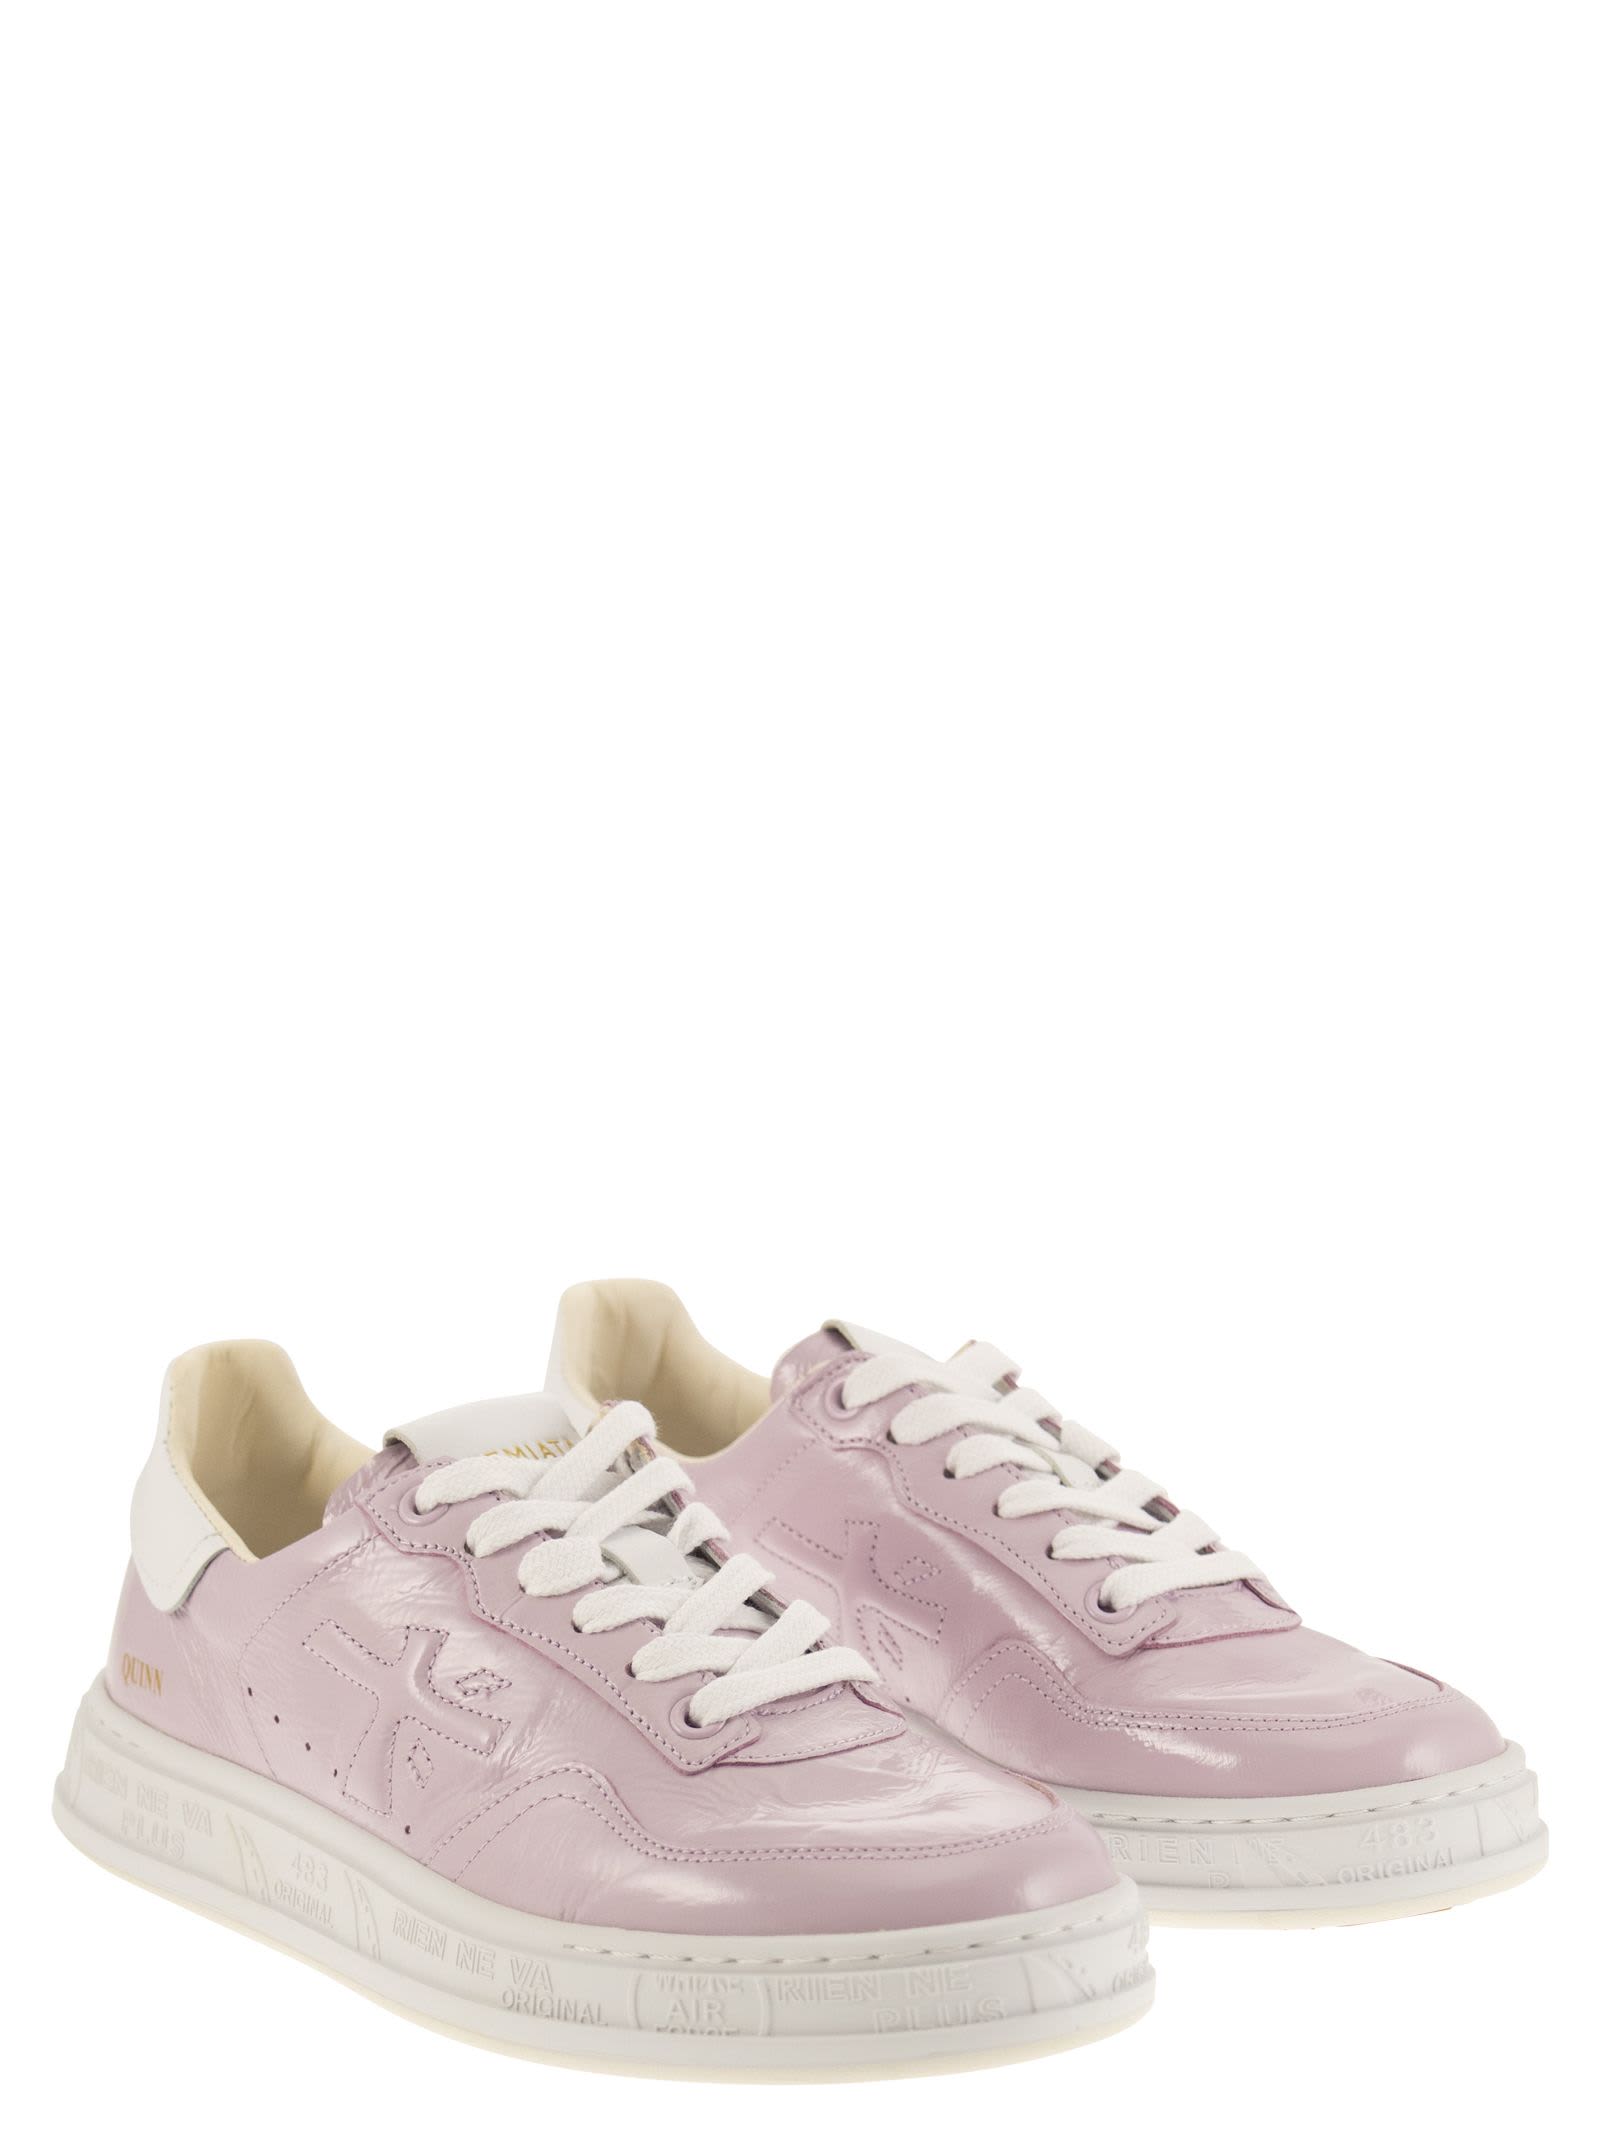 Shop Premiata Quinnd 6319 - Sneakers In Pink